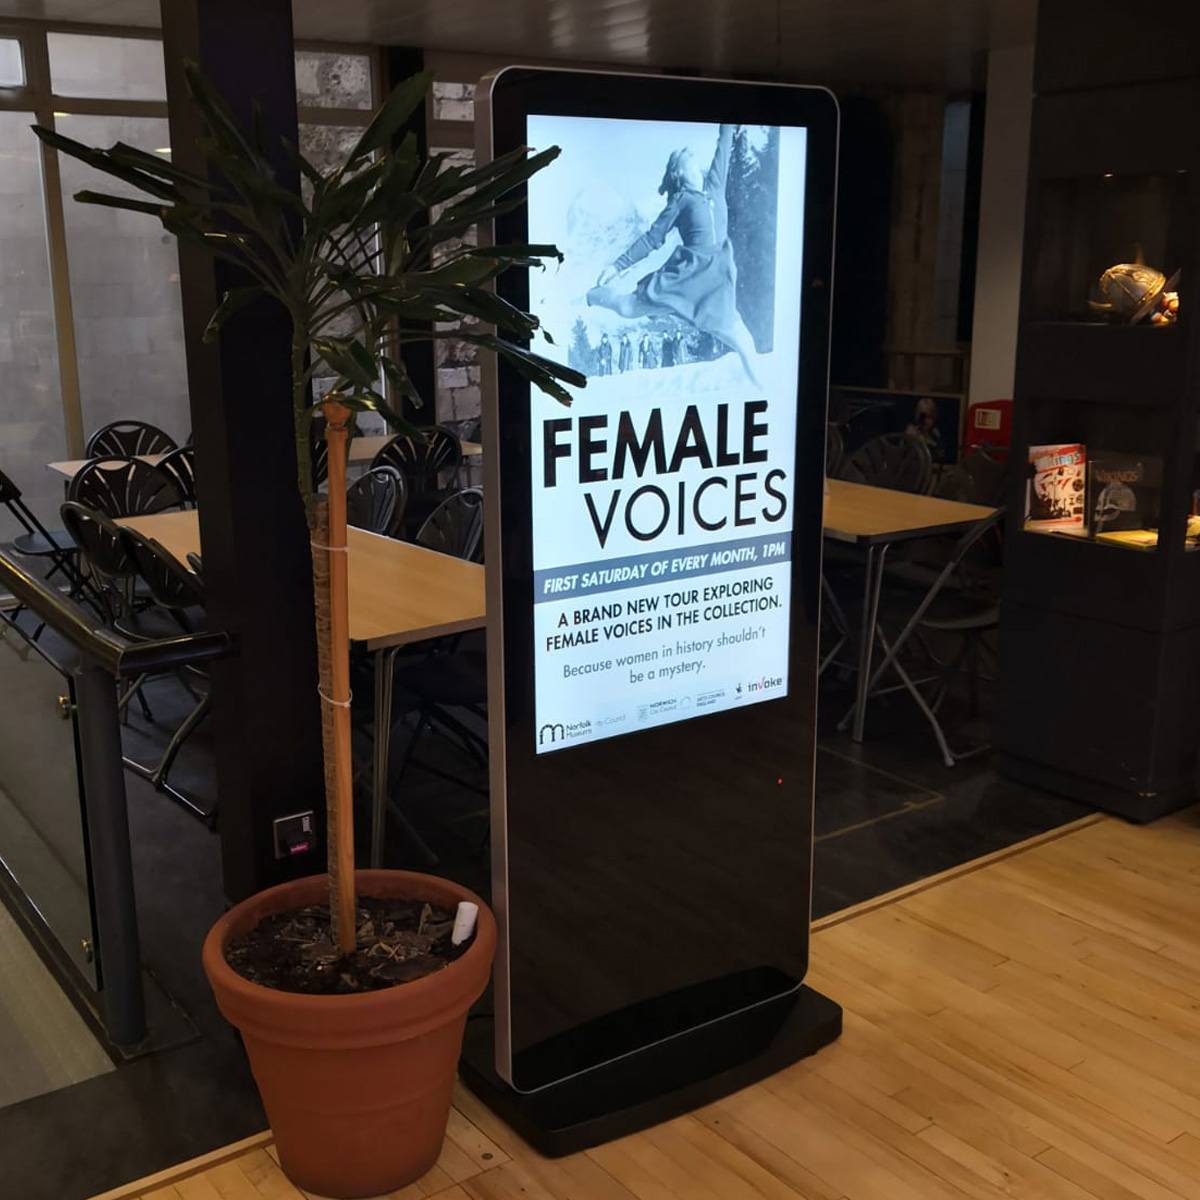 Norfolk museum free standing sign promoting monthly event showcasing female voices throughout history